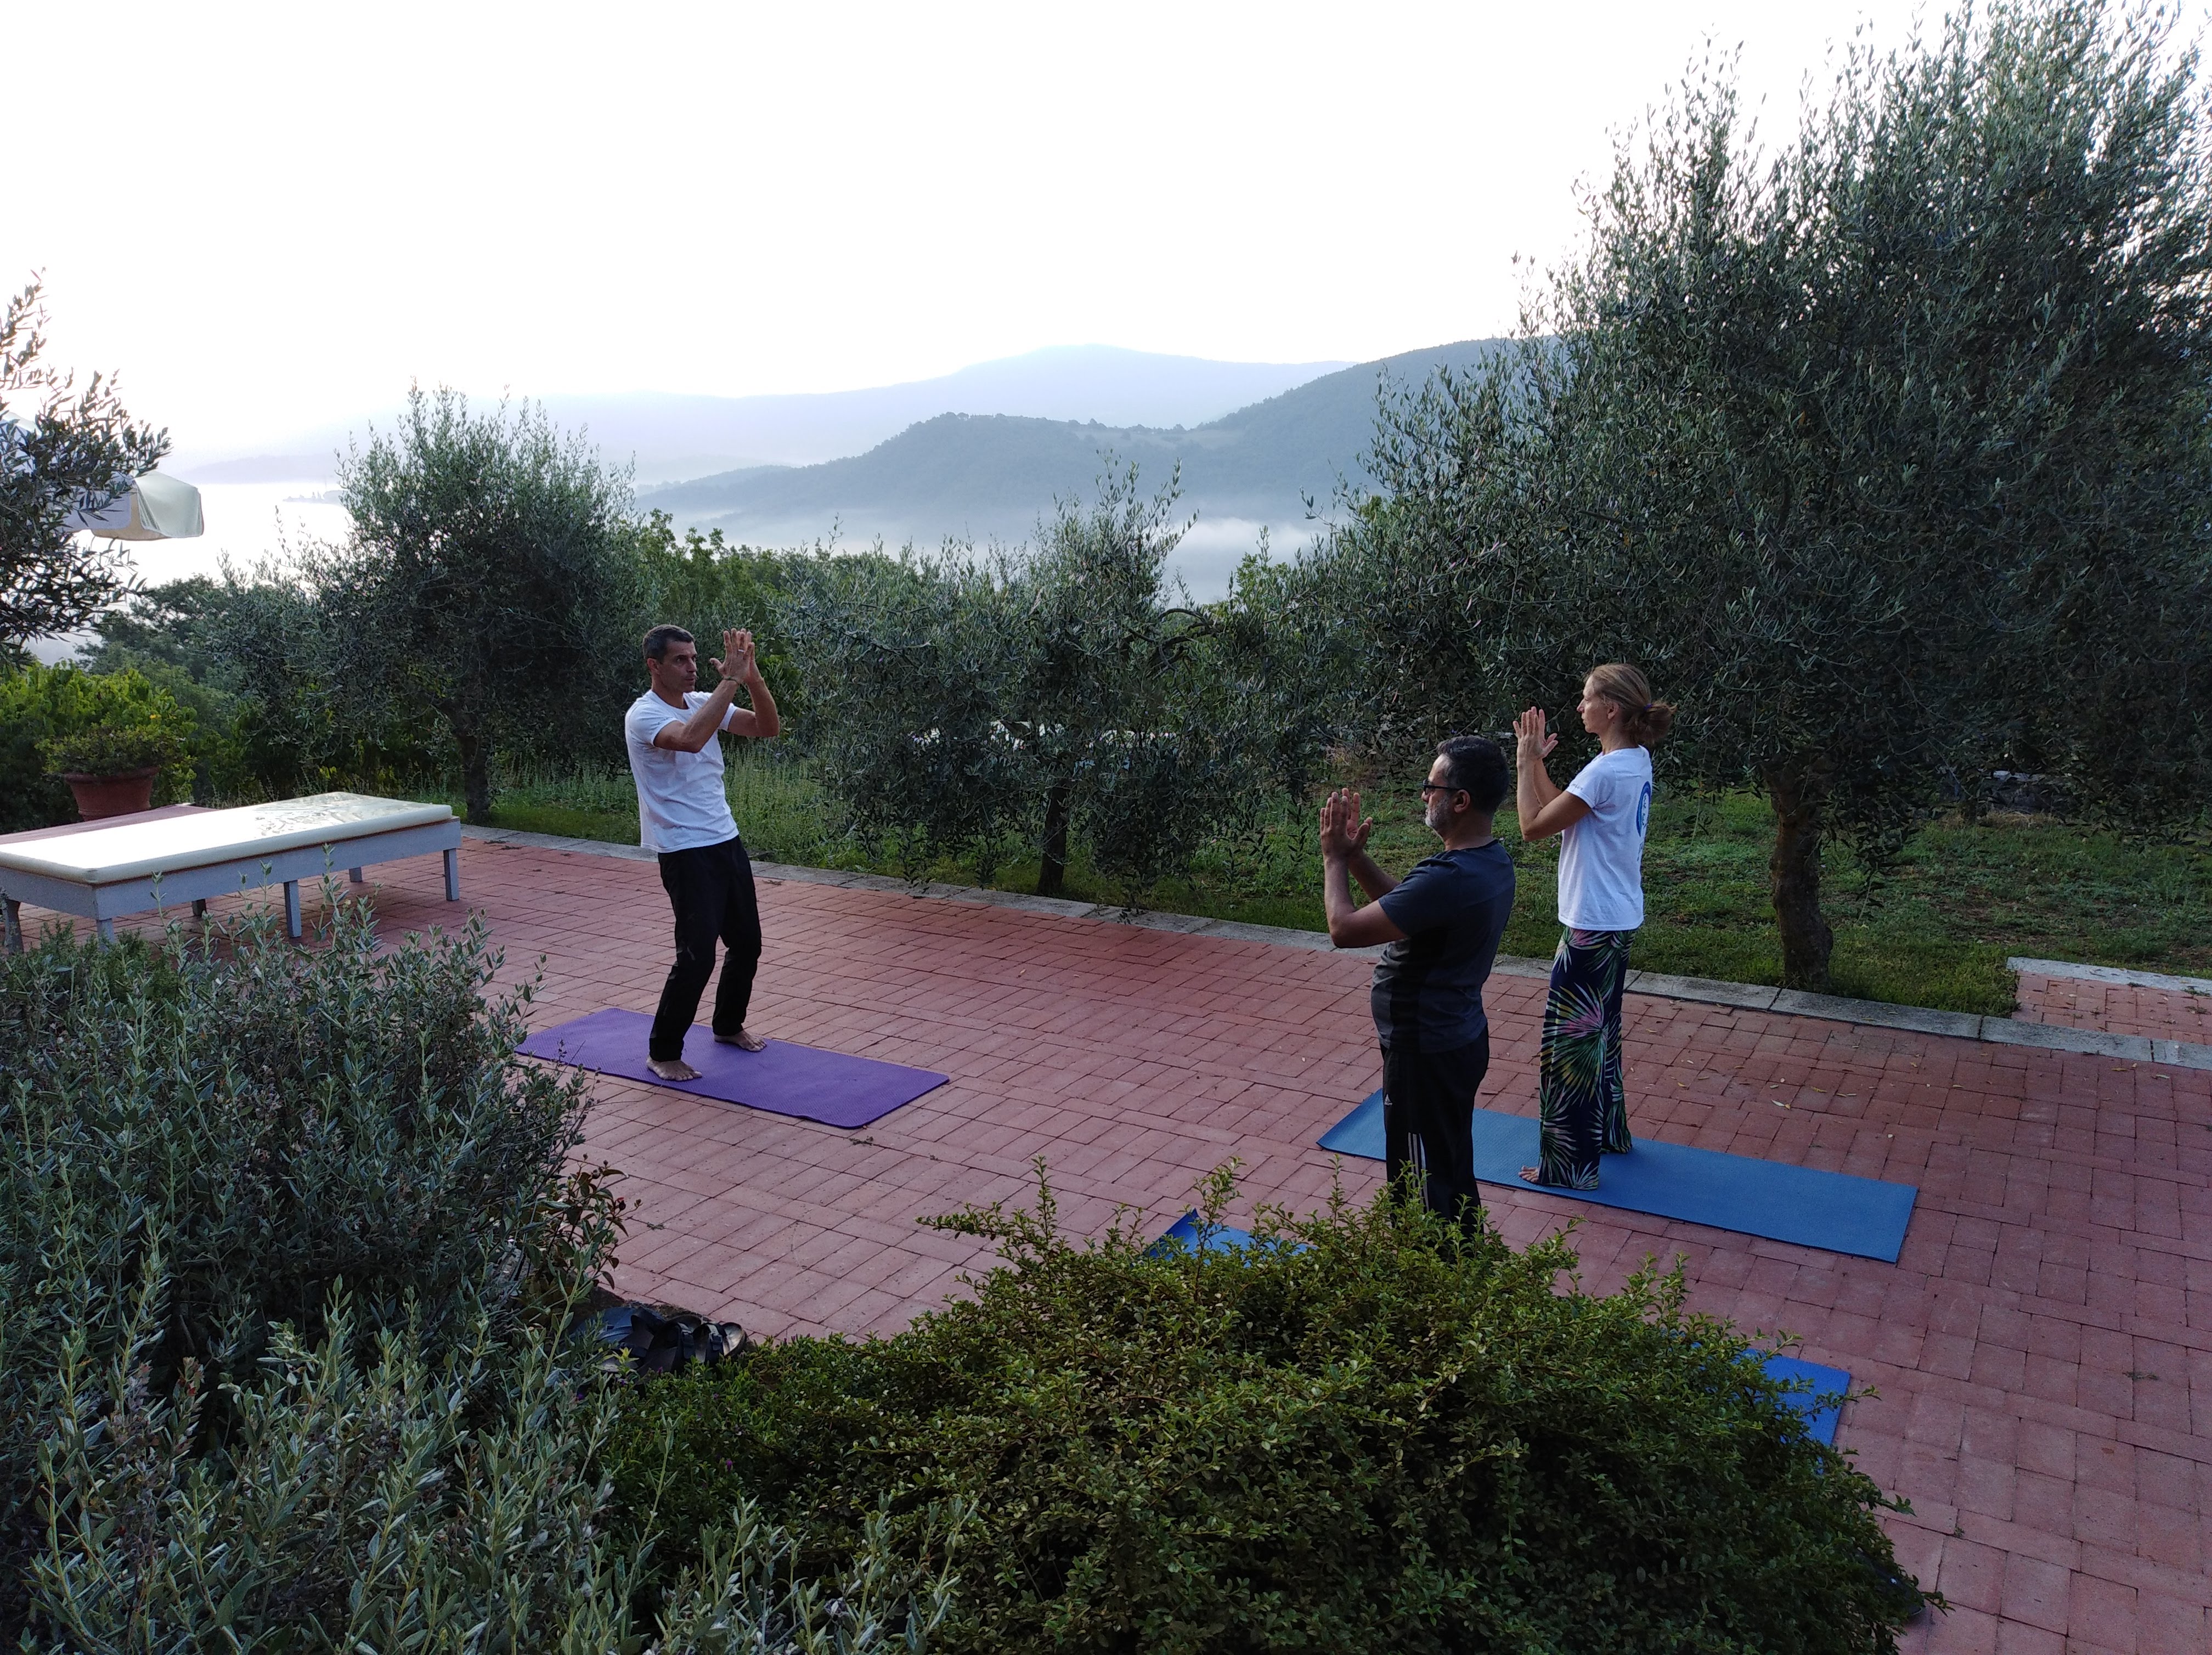 Jumi at the ASE Retreat in Tuscany - August 2019